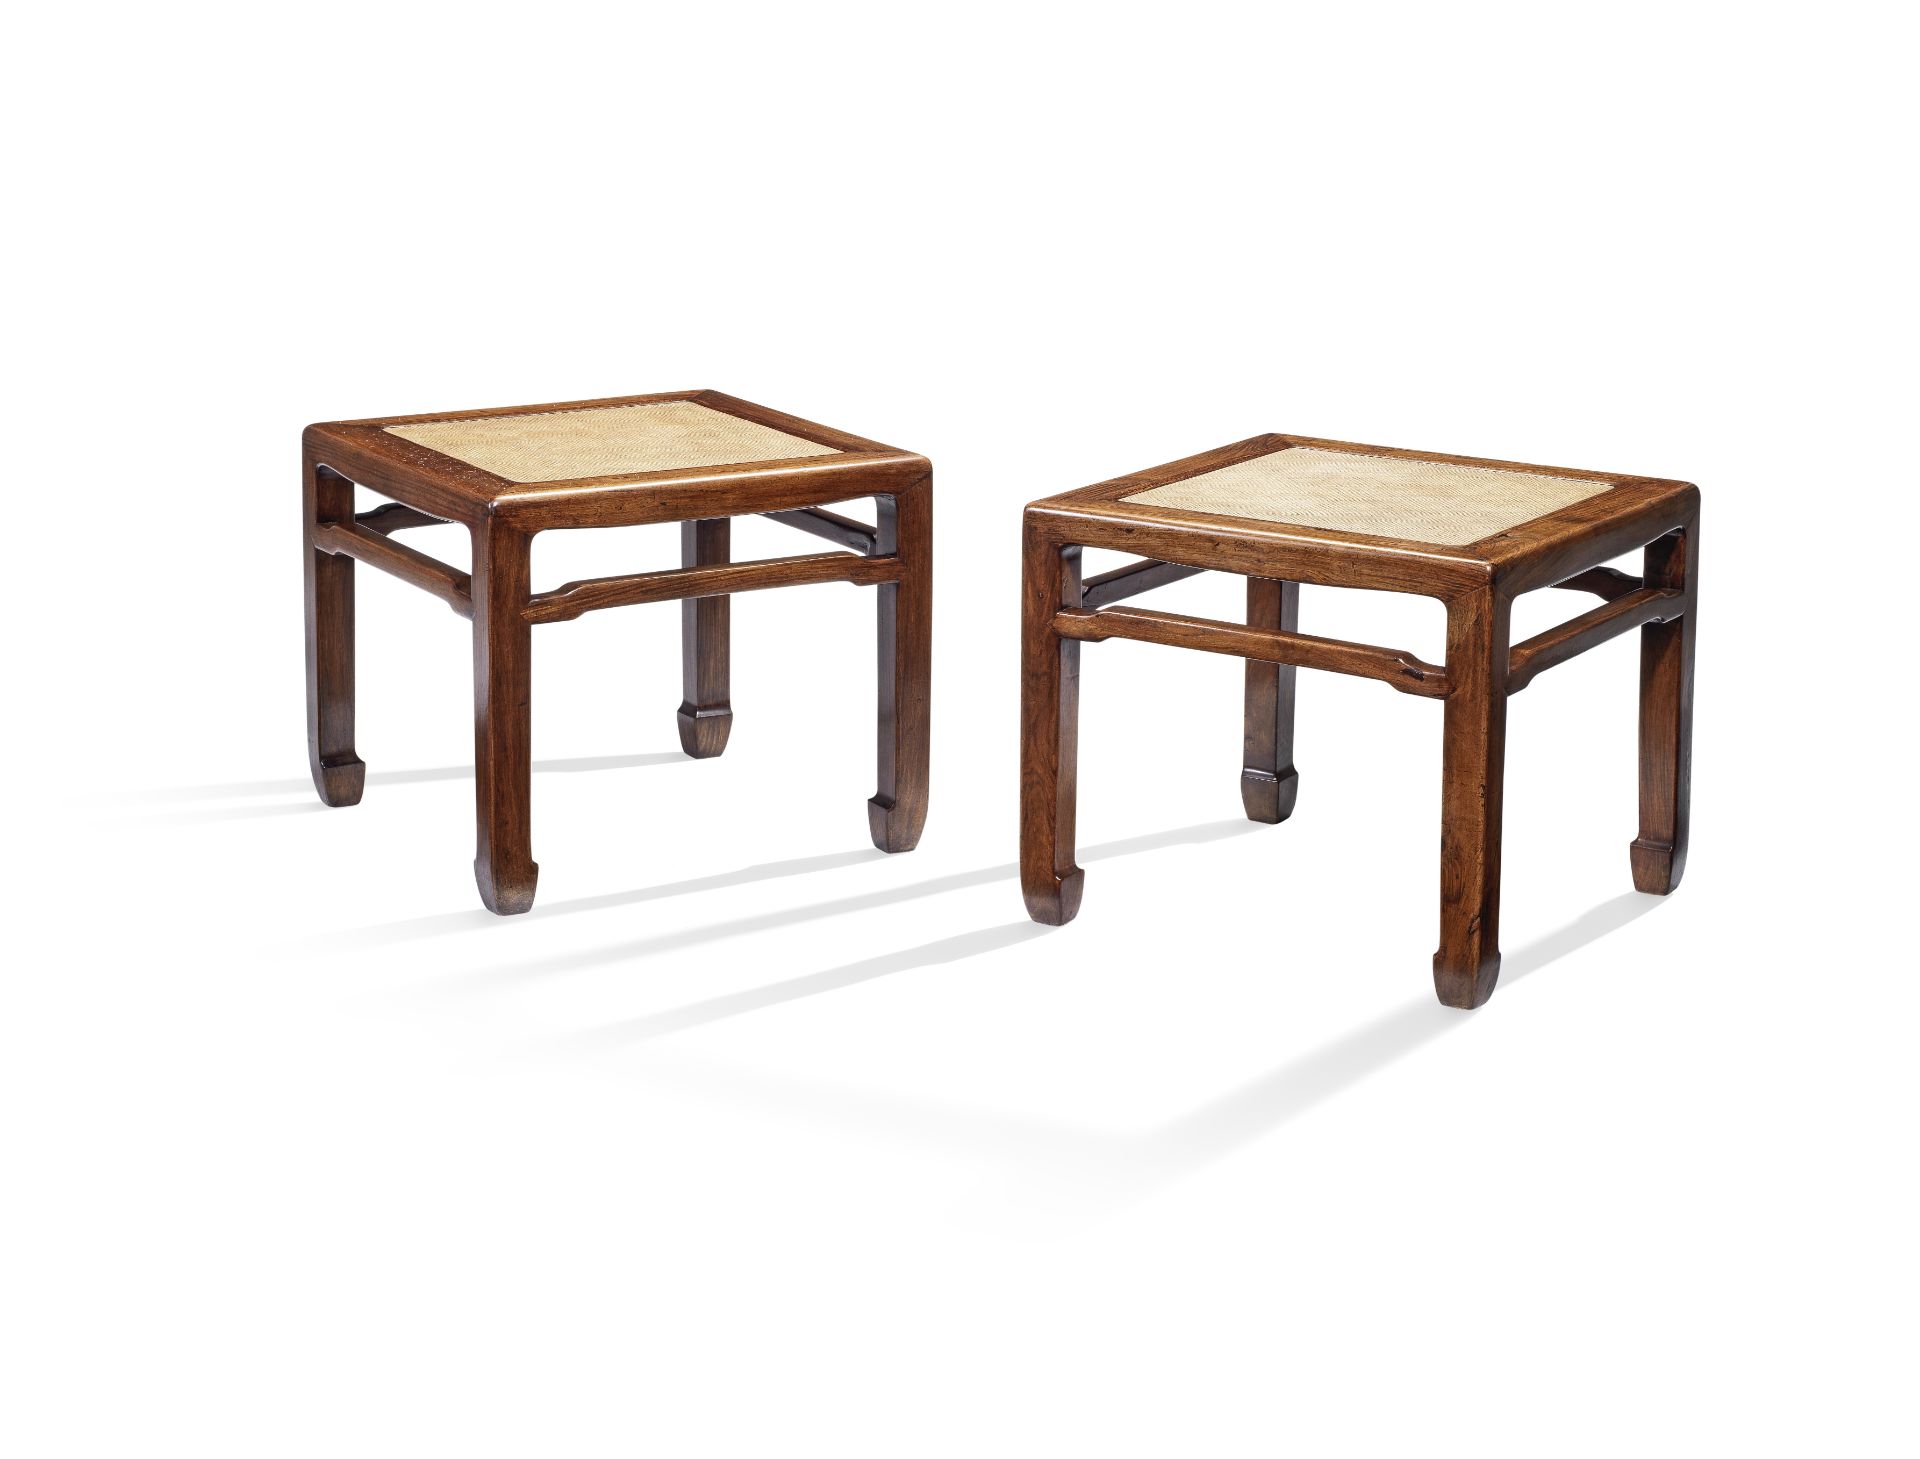 A FINE PAIR OF HUANGHUALI WAISTED CORNER-LEG STOOLS, FANGDENG 17th/18th century (2)